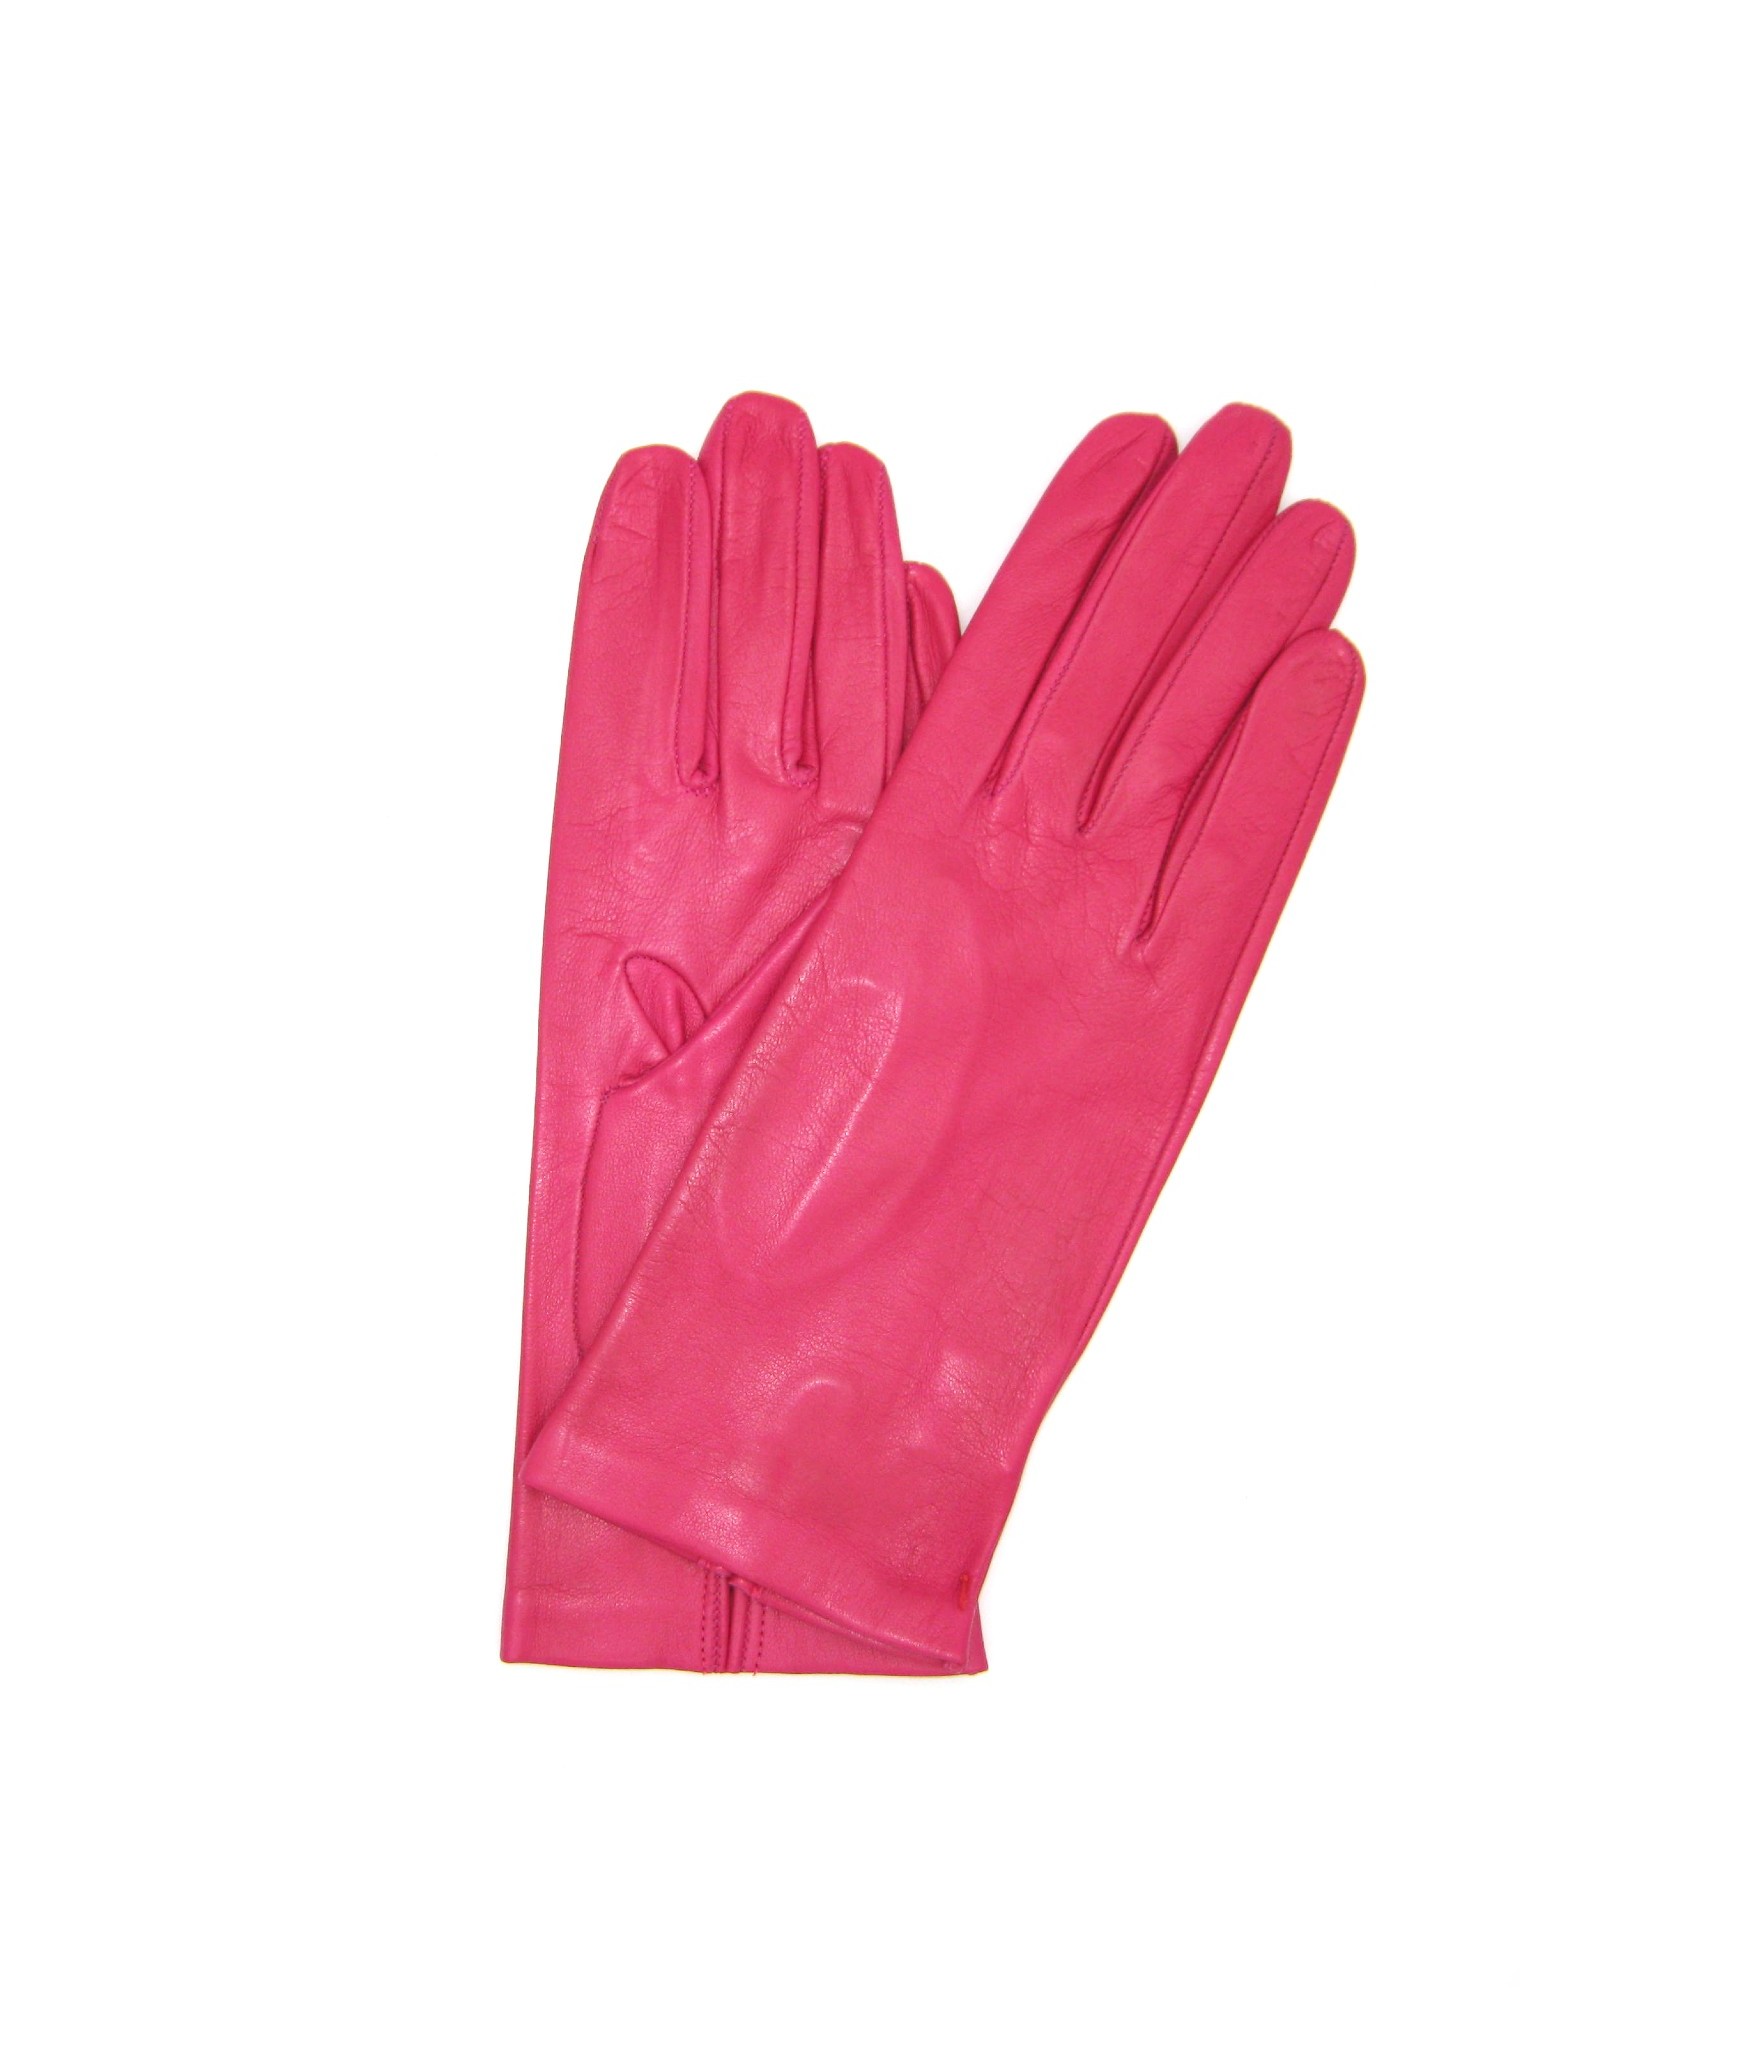 Nappa leather gloves 2bt unlined   Fucsia